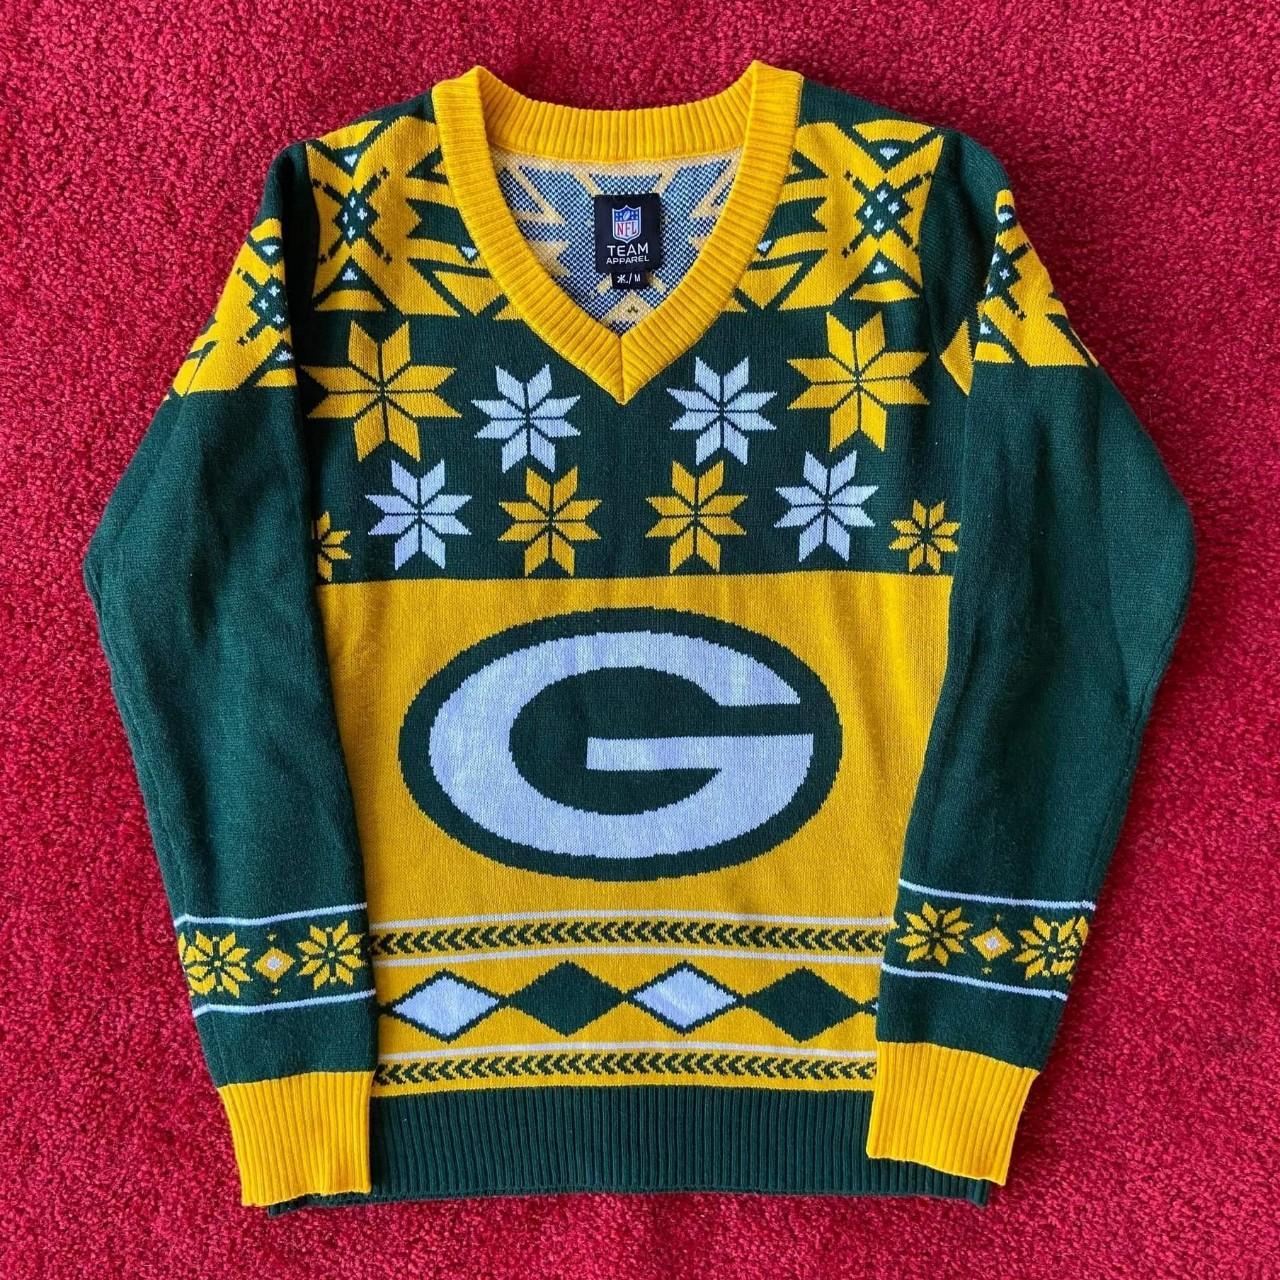 green bay packers knit sweater